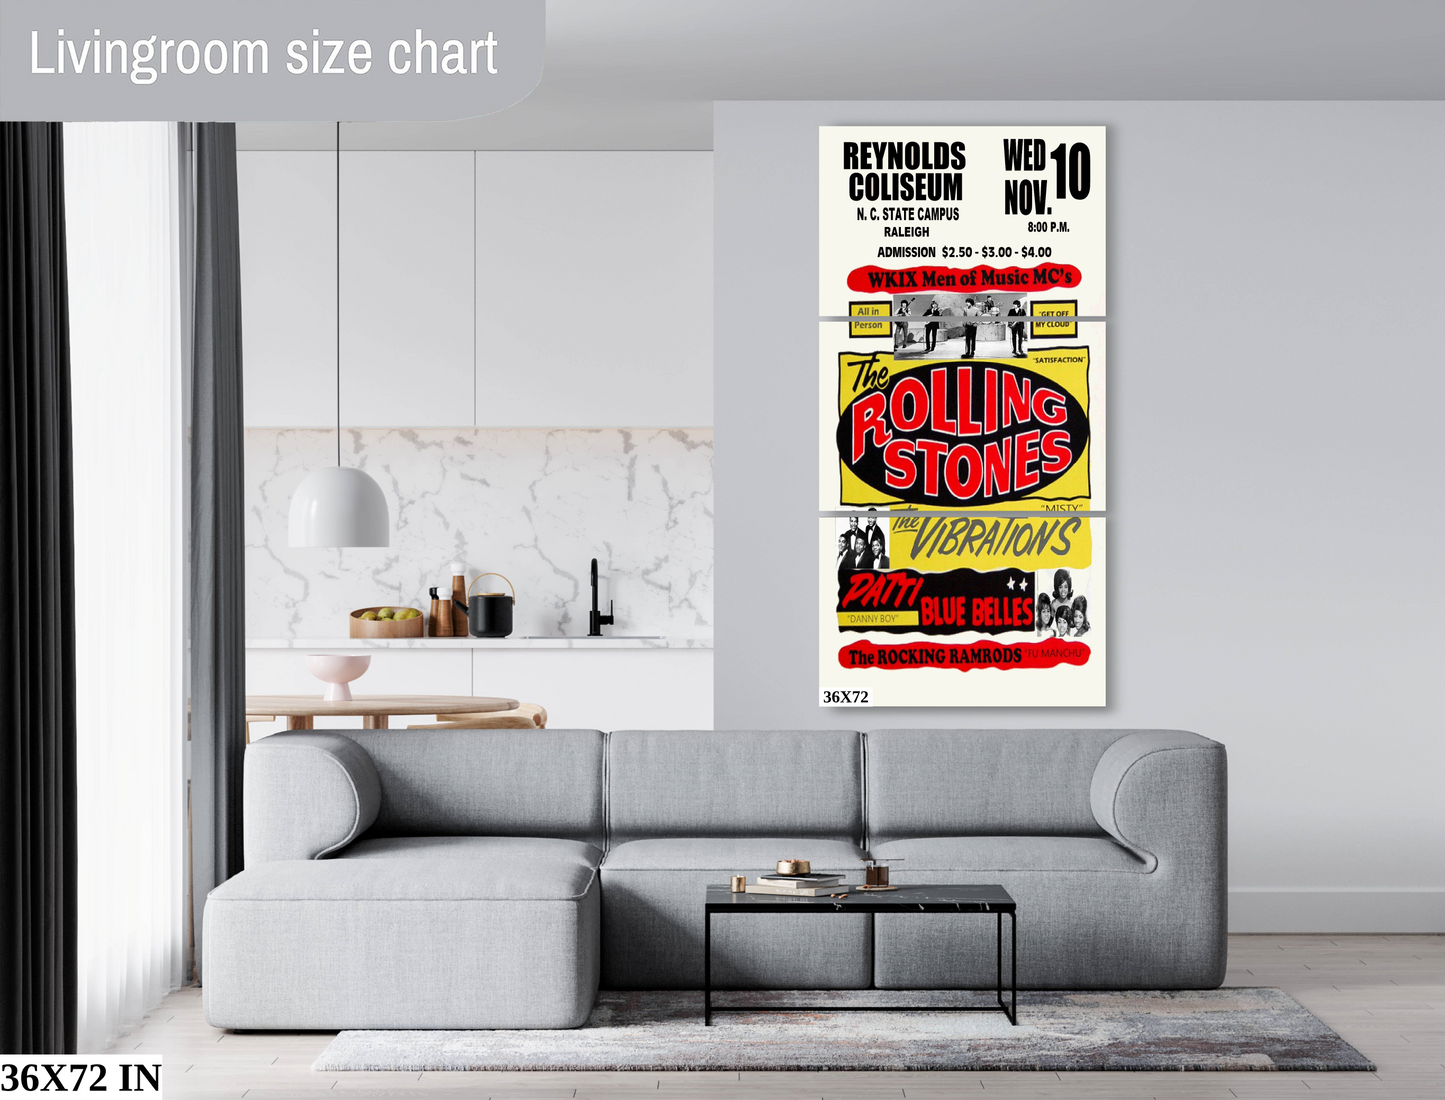 The Rolling Stones concert poster